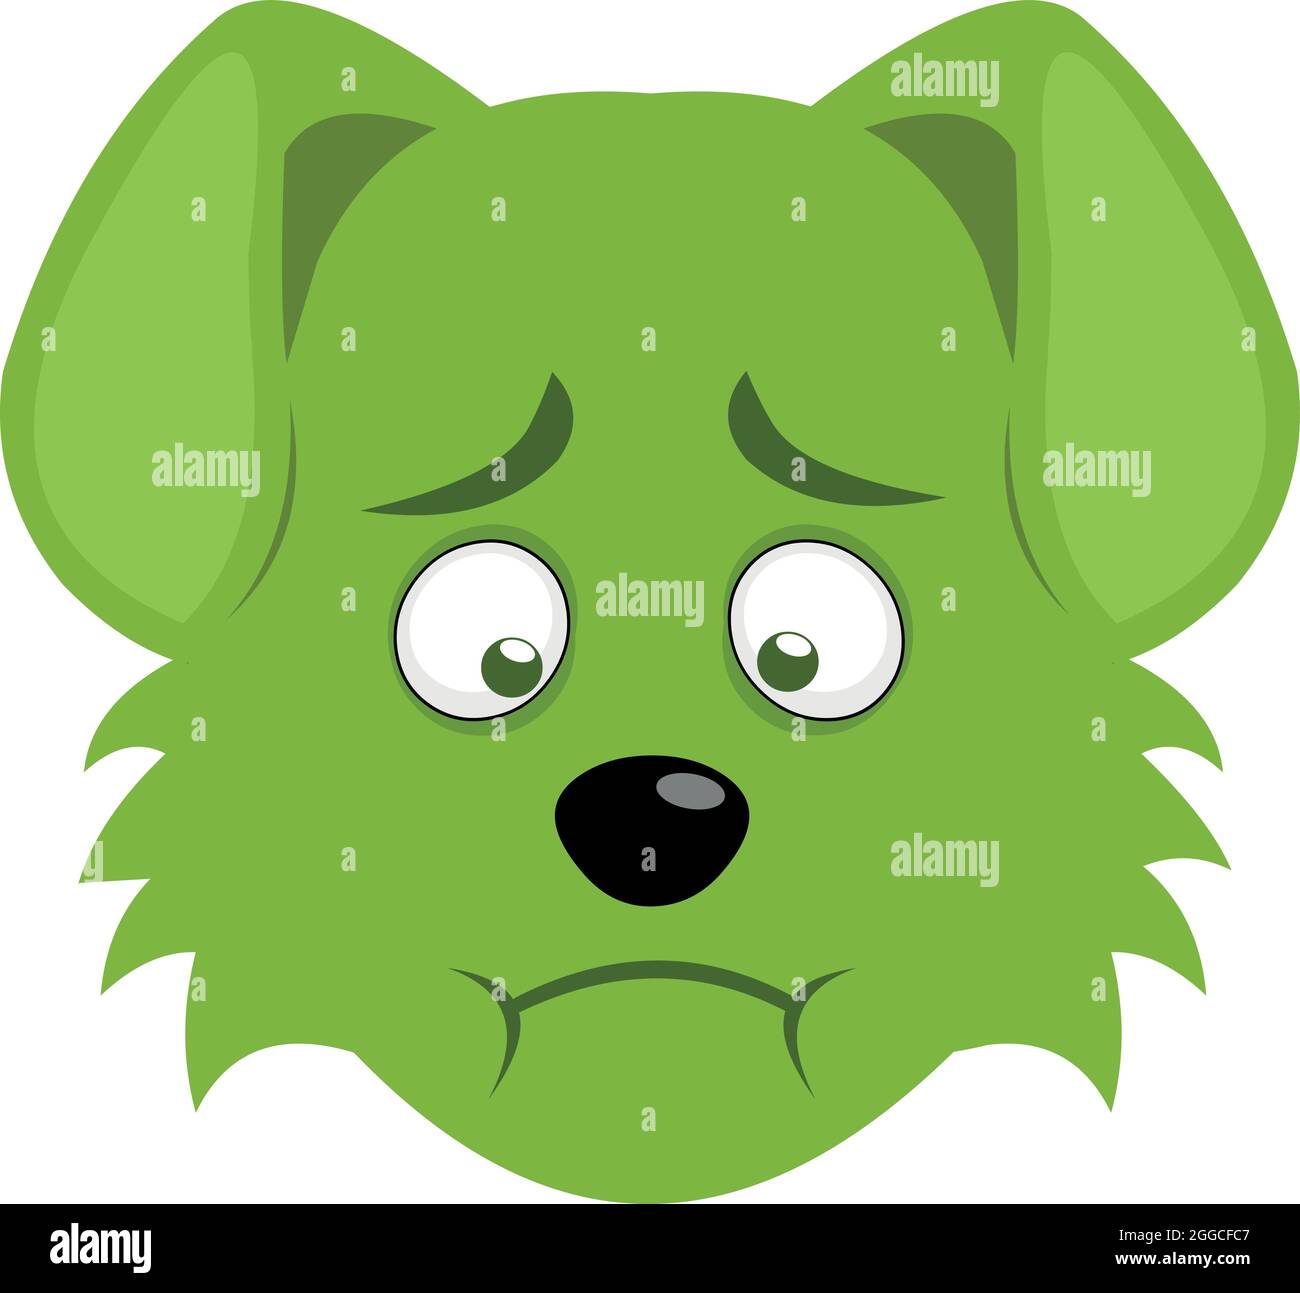 Vector emoticon illustration of the face of a dizzy and green dog Stock Vector